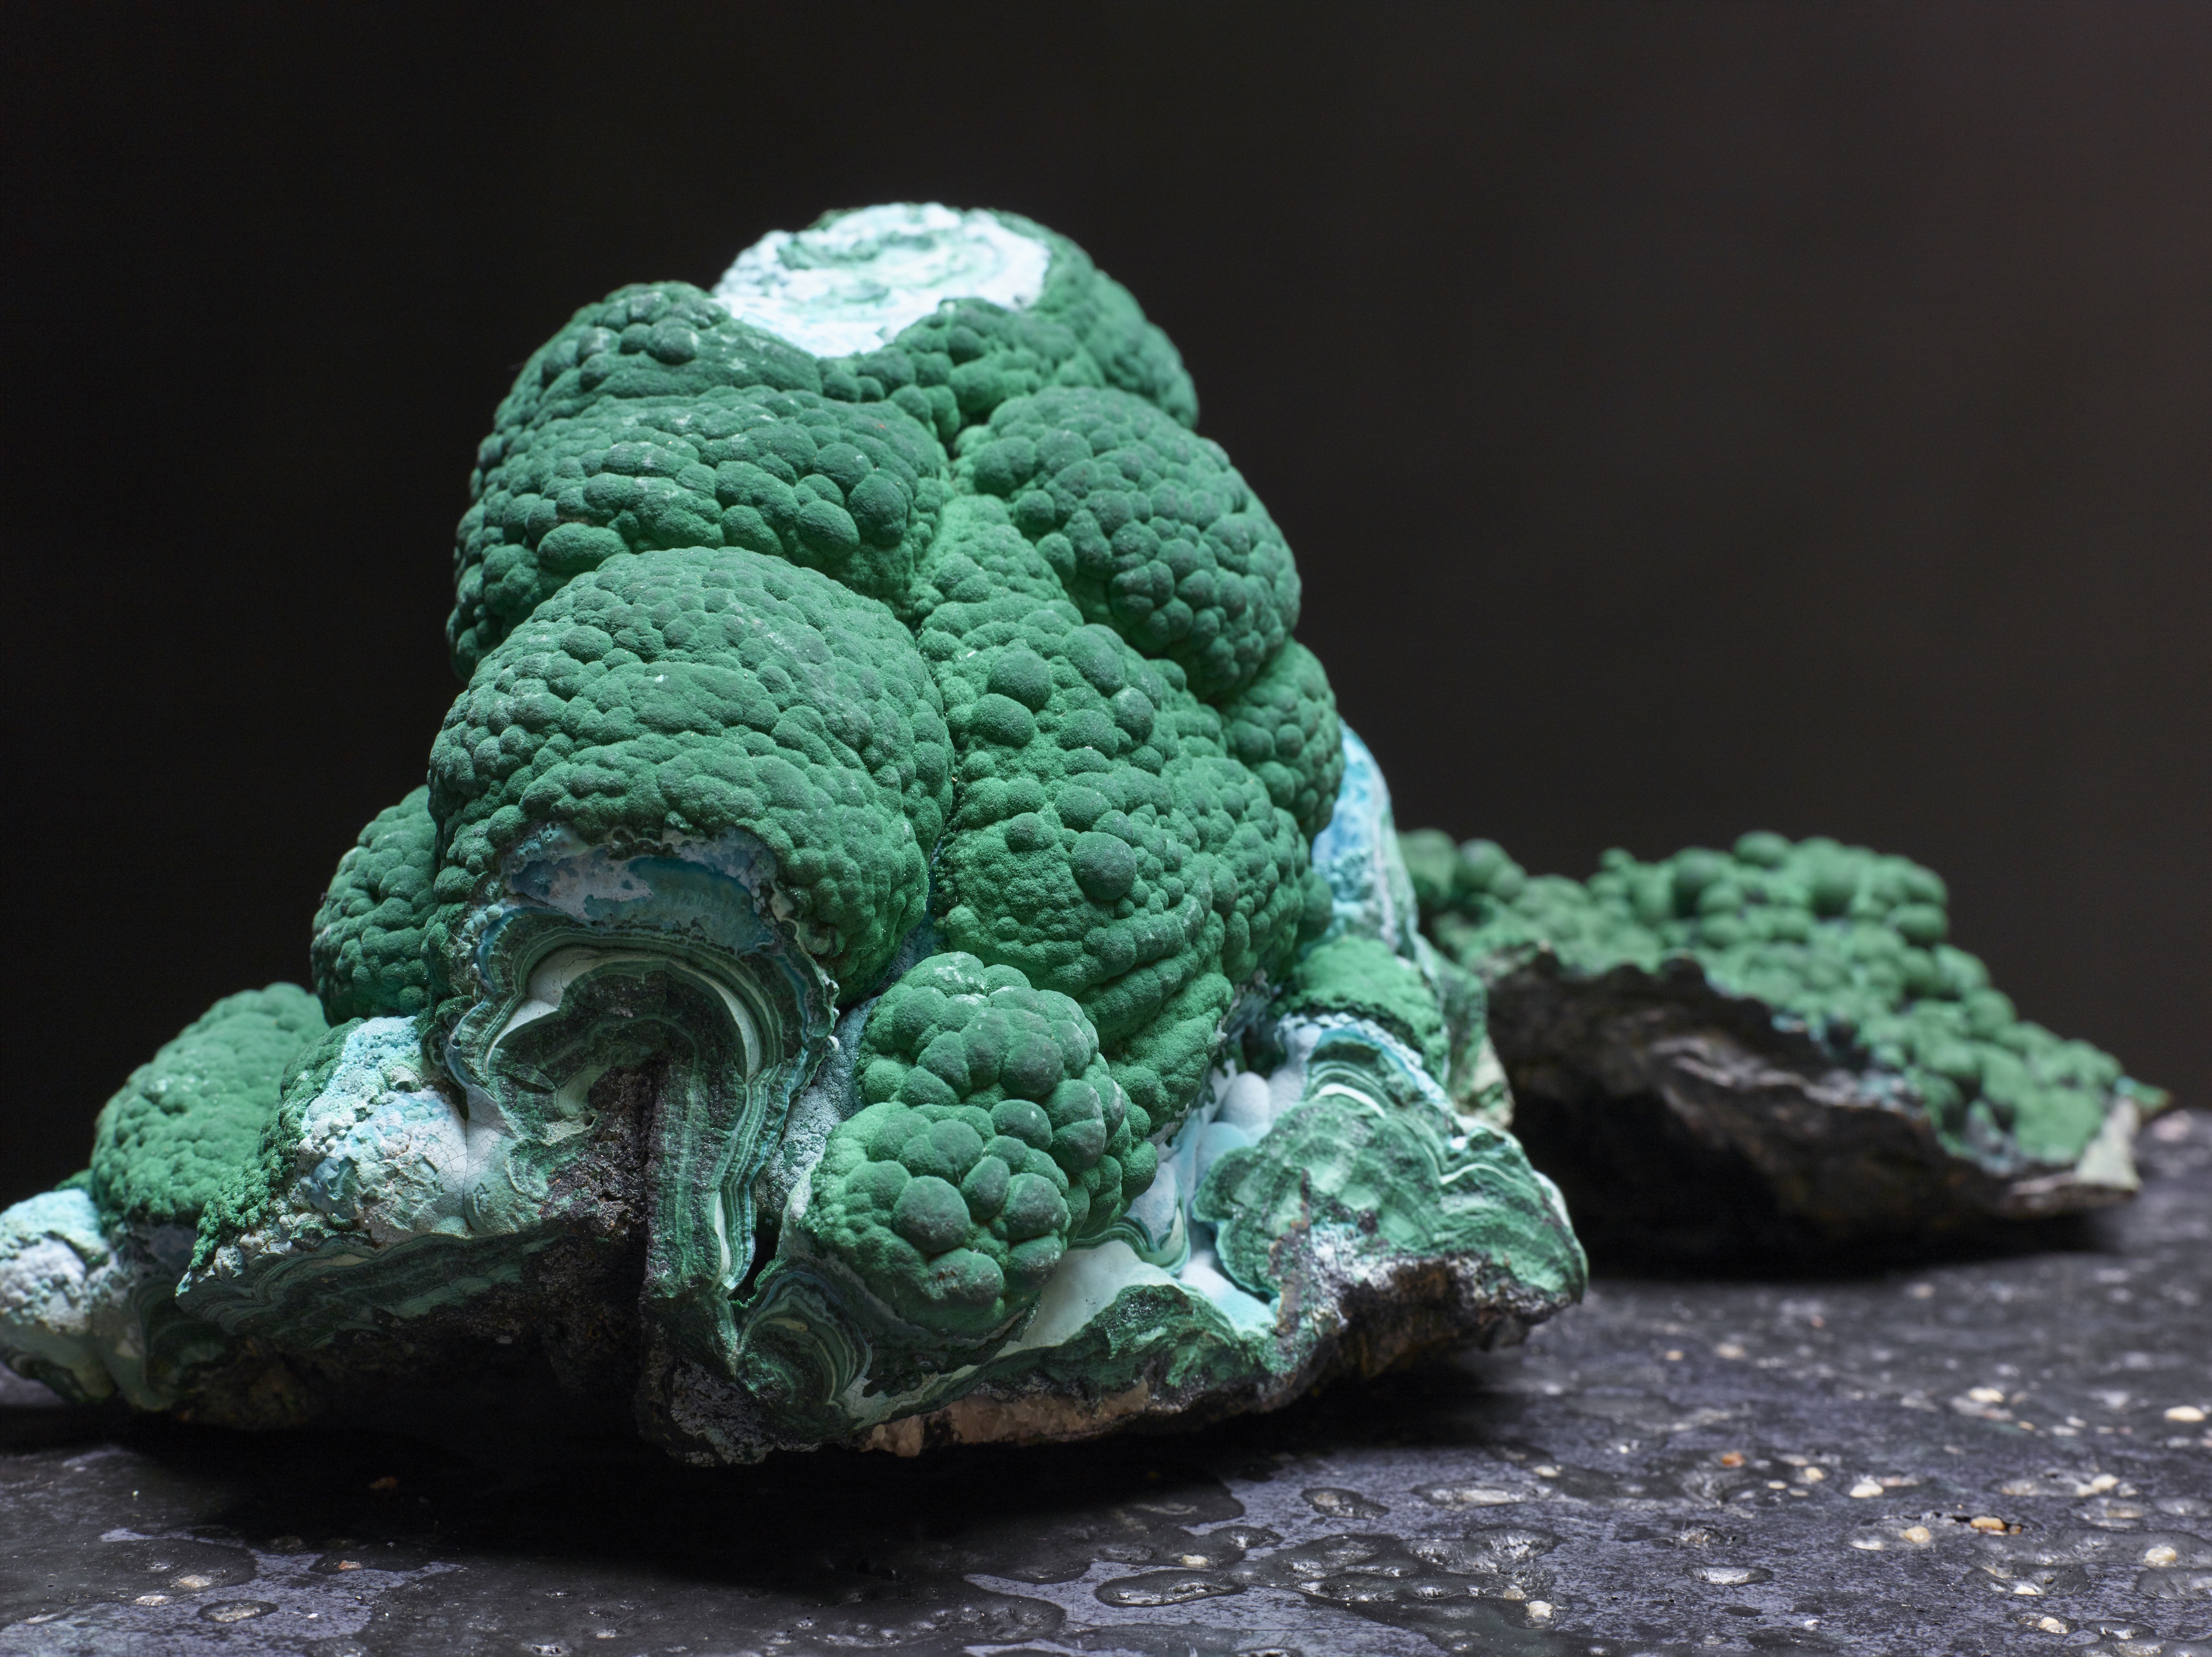 Viñales (Reclining Nude) (detail), 2015. Wakkusu ® Concrete, bronze, and malachite, 48 x 64 x 101 inches. Courtesy the artist, and Lehmann Maupin, New York and Hong Kong.